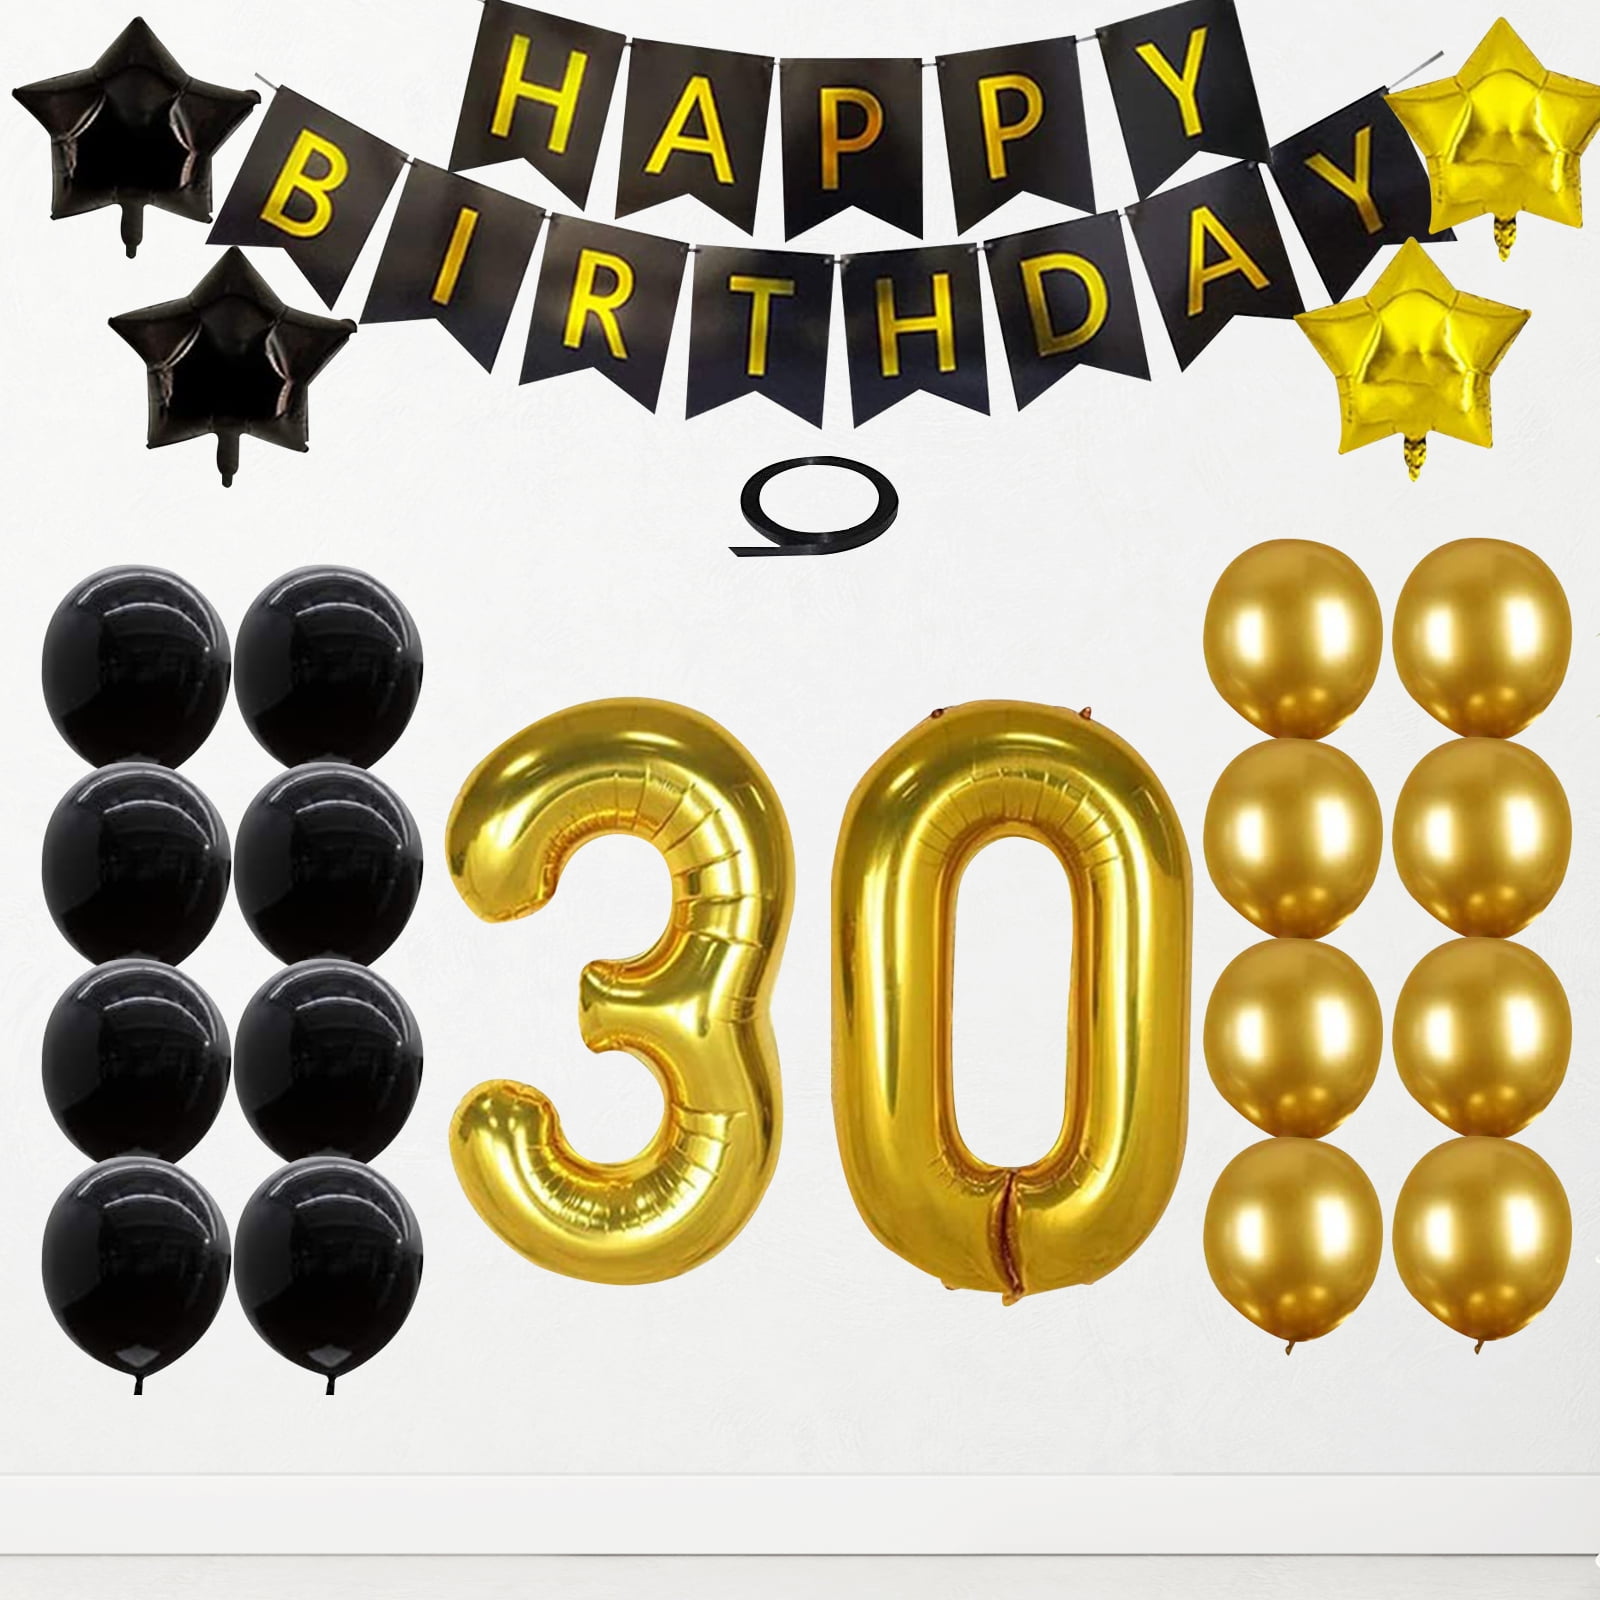 Details about   50th Happy Birthday Glittery Gold Standard Helium Foil Balloons Party Decoration 